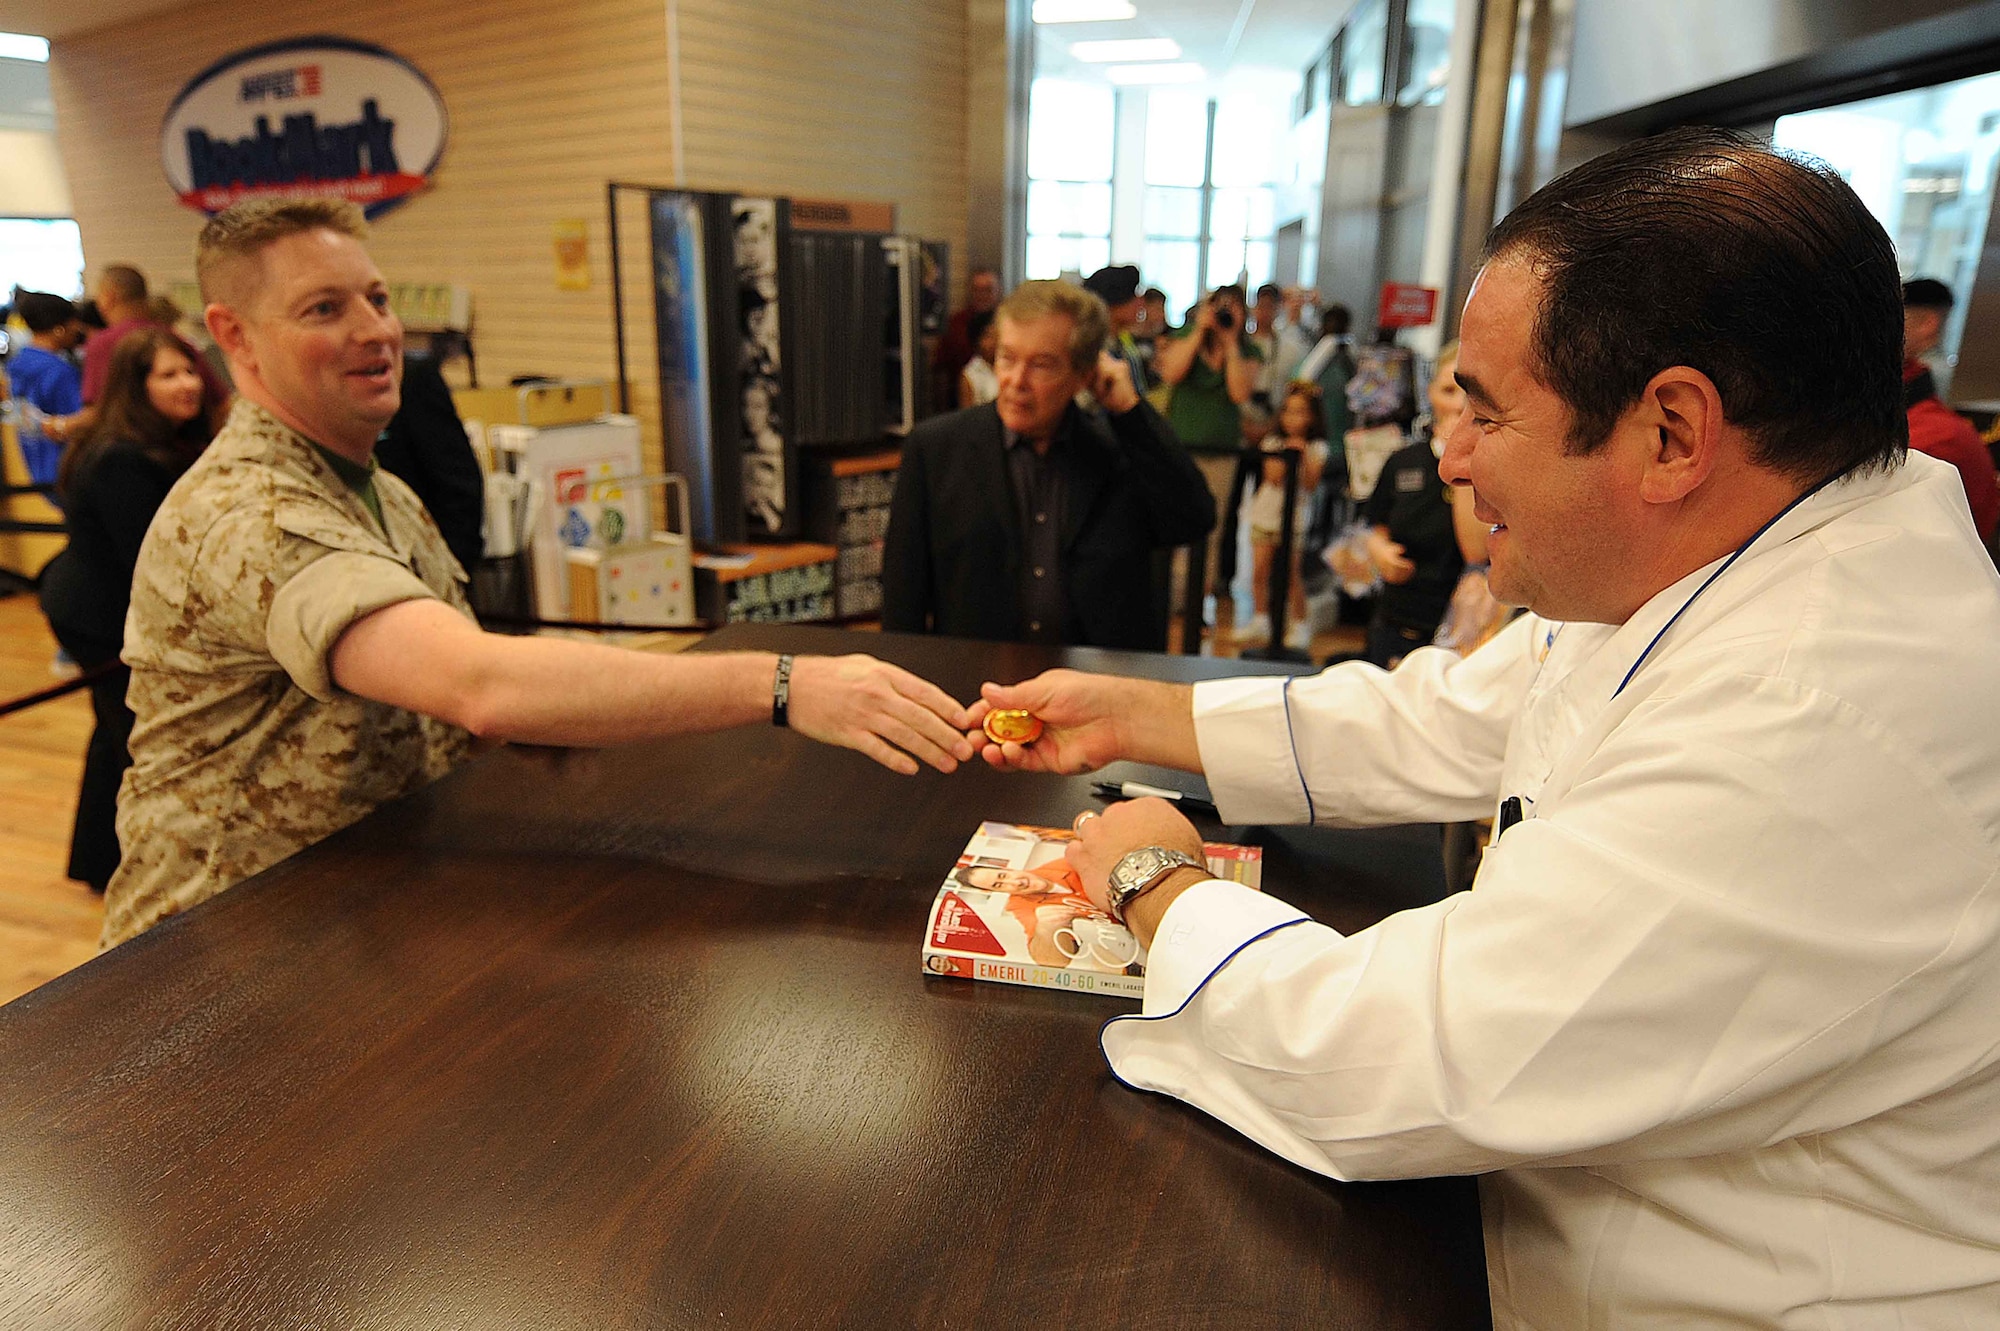 U.S. Marine Corps Gunnery Sgt. Ben Coleman, Wounded Warrior Center representative, presents Chef Emeril Lagasse with a unit coin during a book signing at the Kaiserslautern Military Community Center, Ramstein Air Base, Germany, May 29, 2010. Celebrity Chef Emeril Lagasse visited the KMCC to promote his new book along with providing a book signing and a full production cooking exhibition copies of his new book and performing an hour long cooking demonstration for over a thousand visitors. (U.S. Air Force photo by Staff Sgt. Stephen J. Otero)